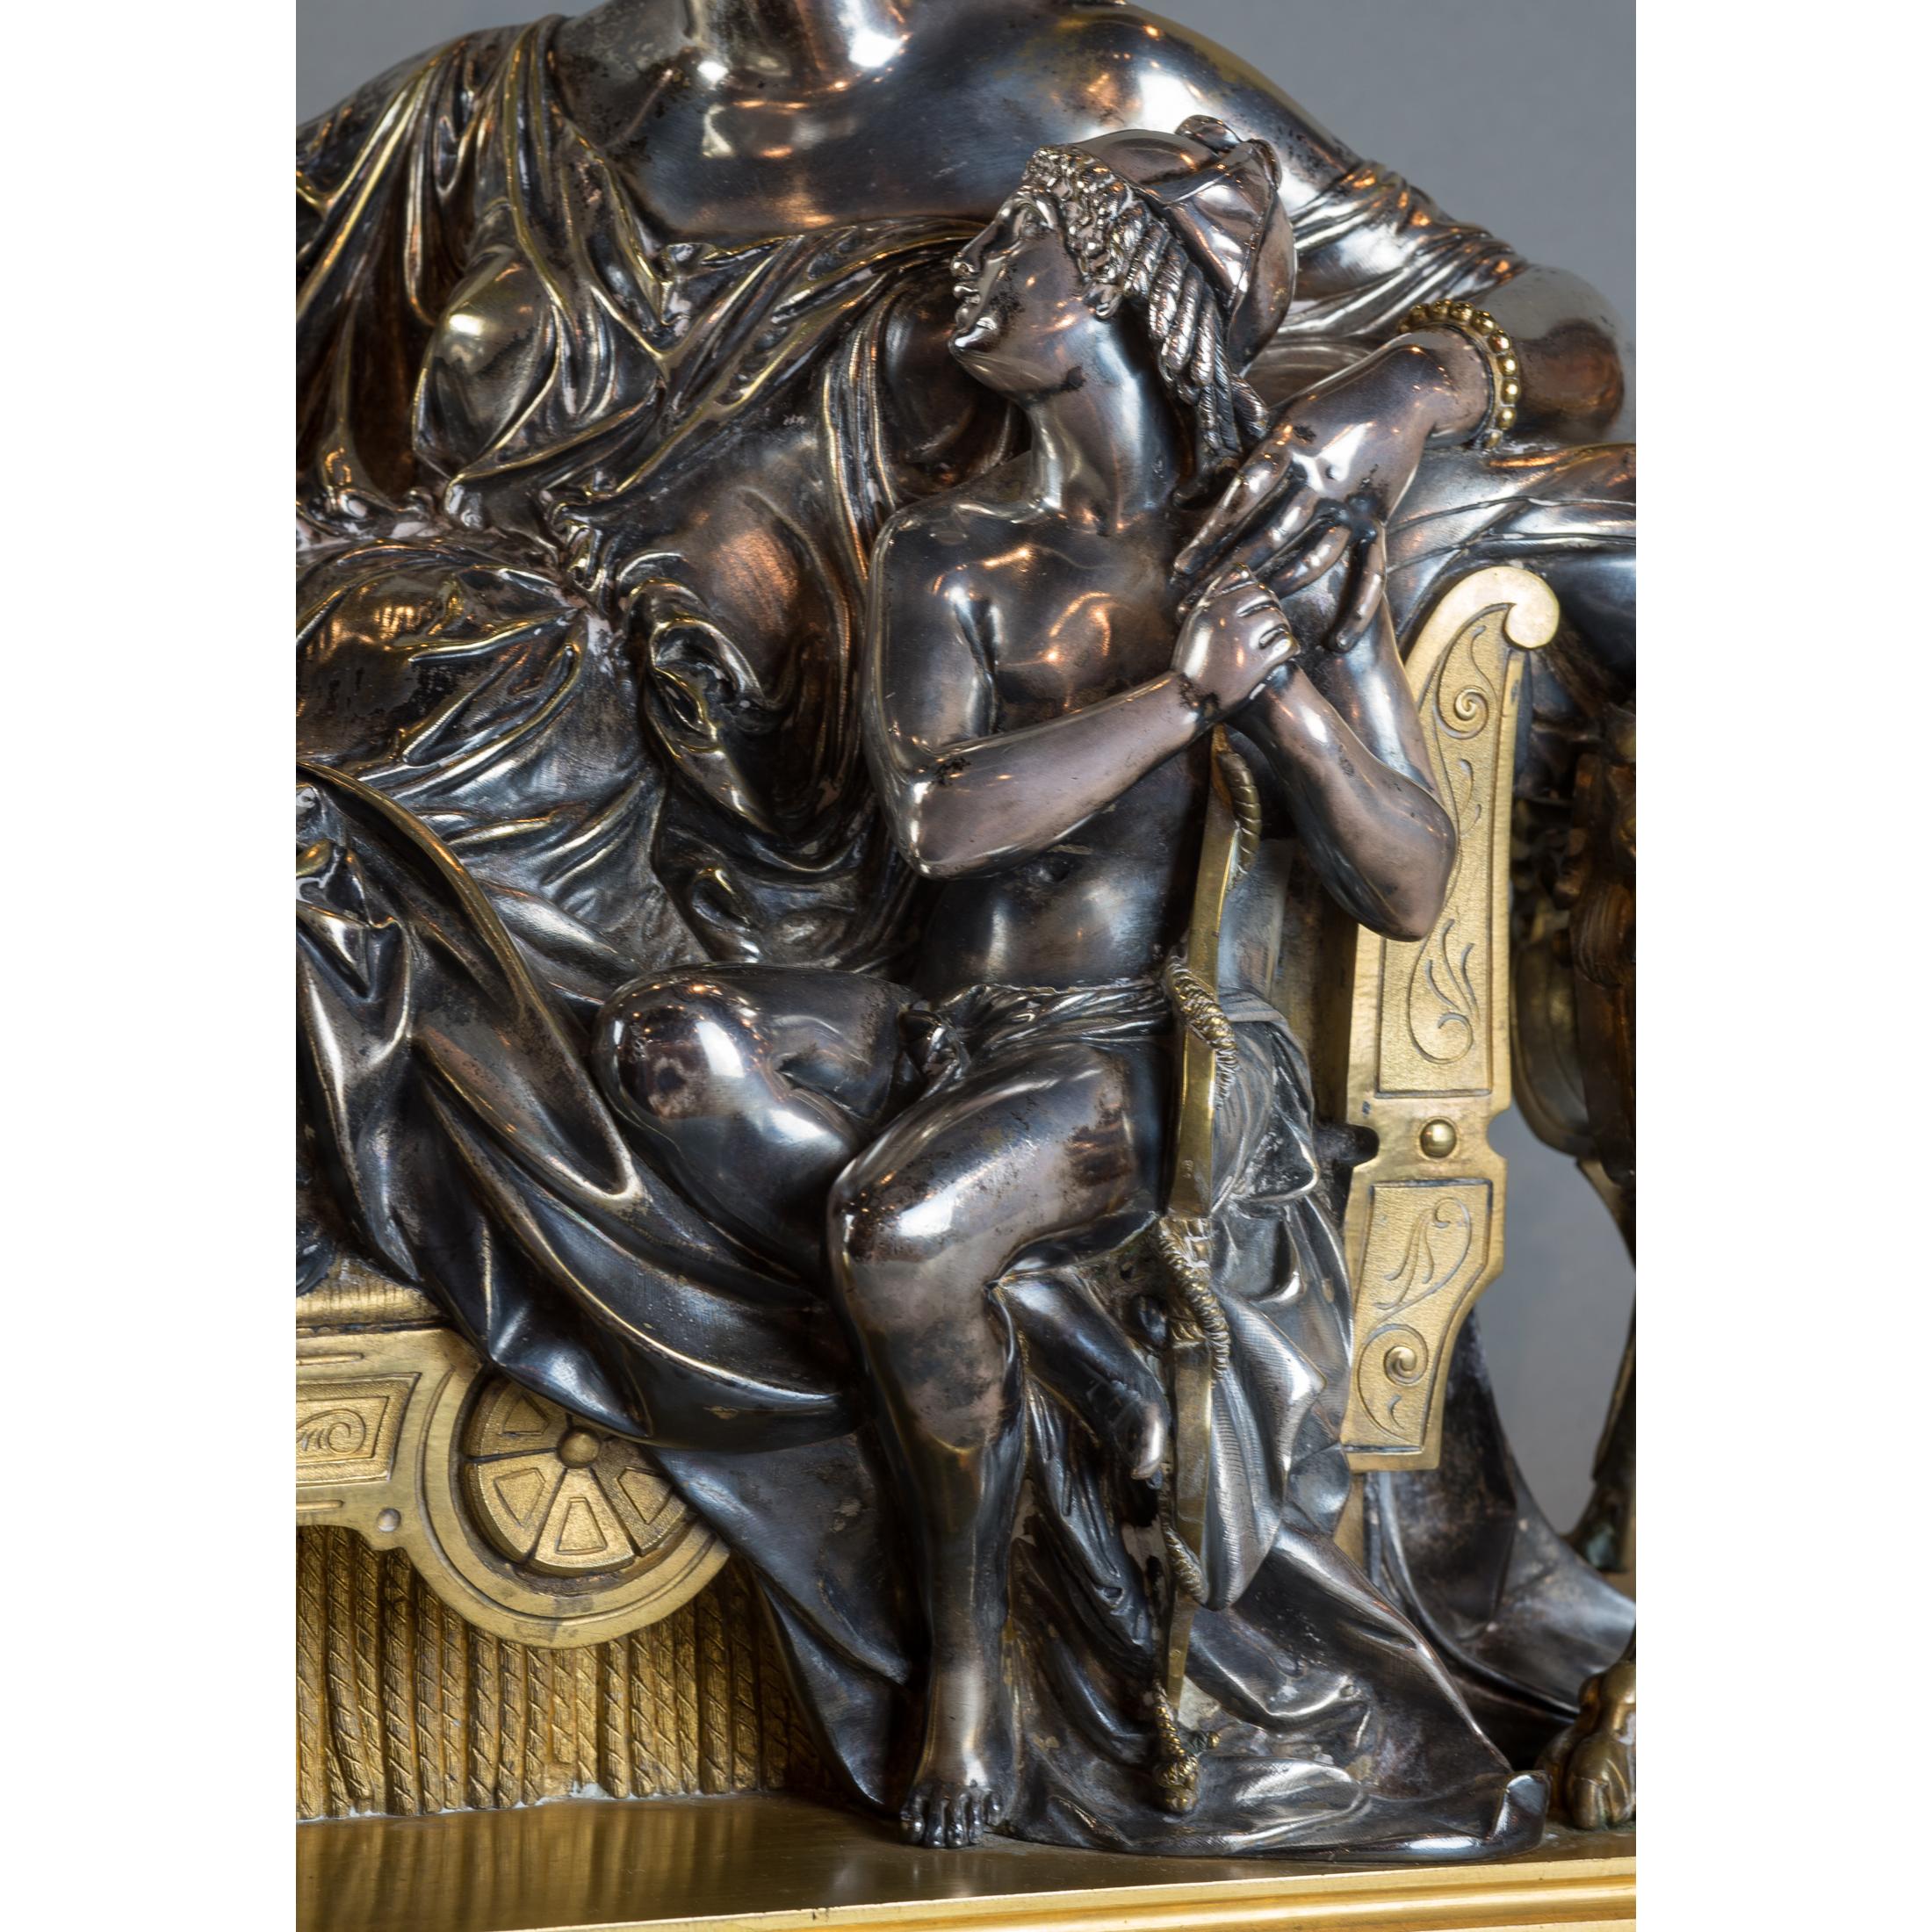 Jean-Baptiste Clésinger
French, (1814-1883)

Reclining Woman and Child

Exquisite cast bronze sculpture of reclining woman and child with silver highlights on figures and robes. Furnishings and base in dore gilt.
15 in. x 24 in. x  8 in.